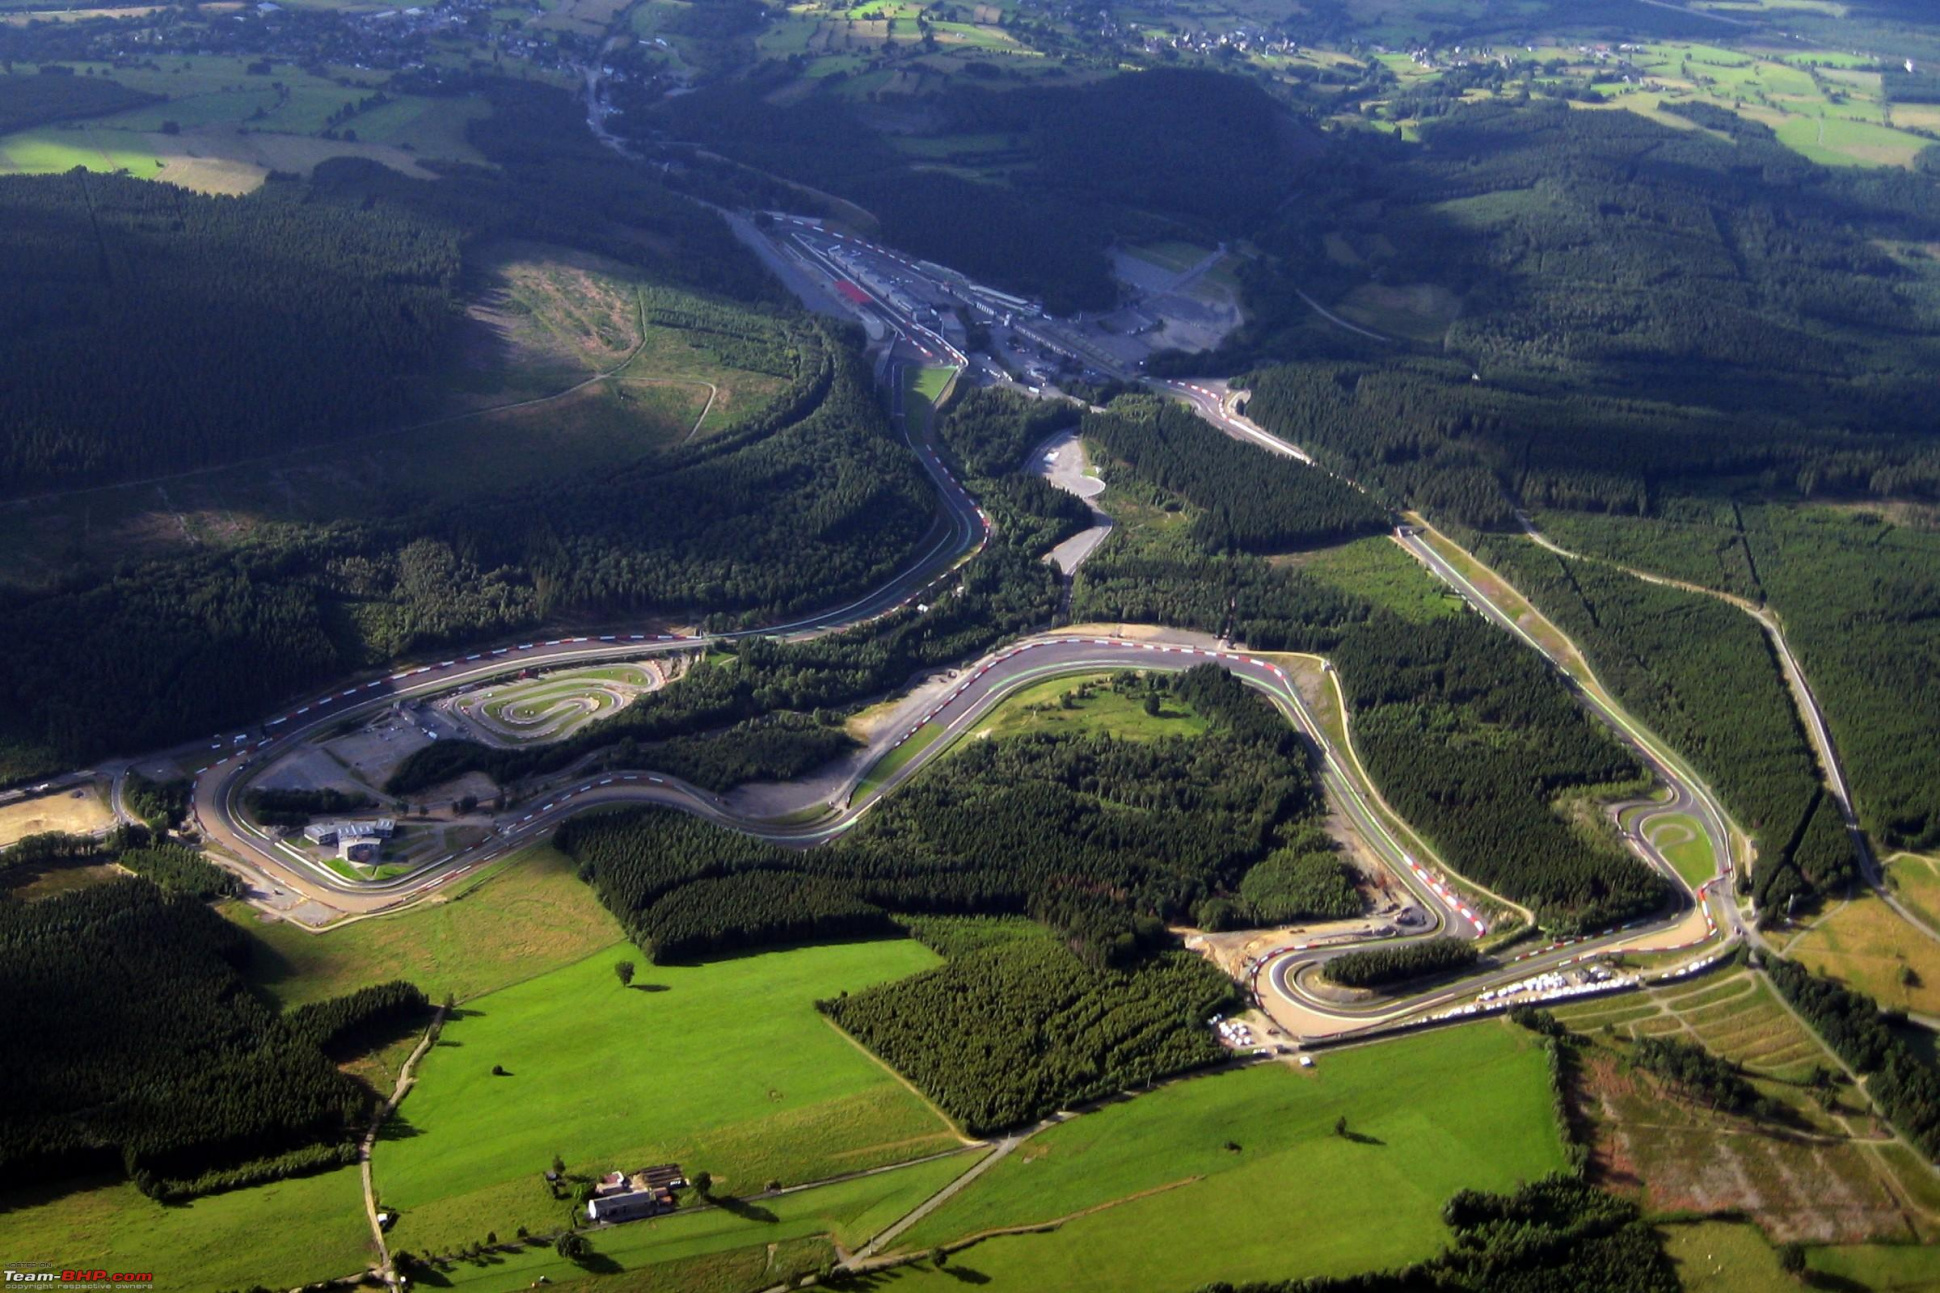 SpaFrancorchamps_overview.jpg